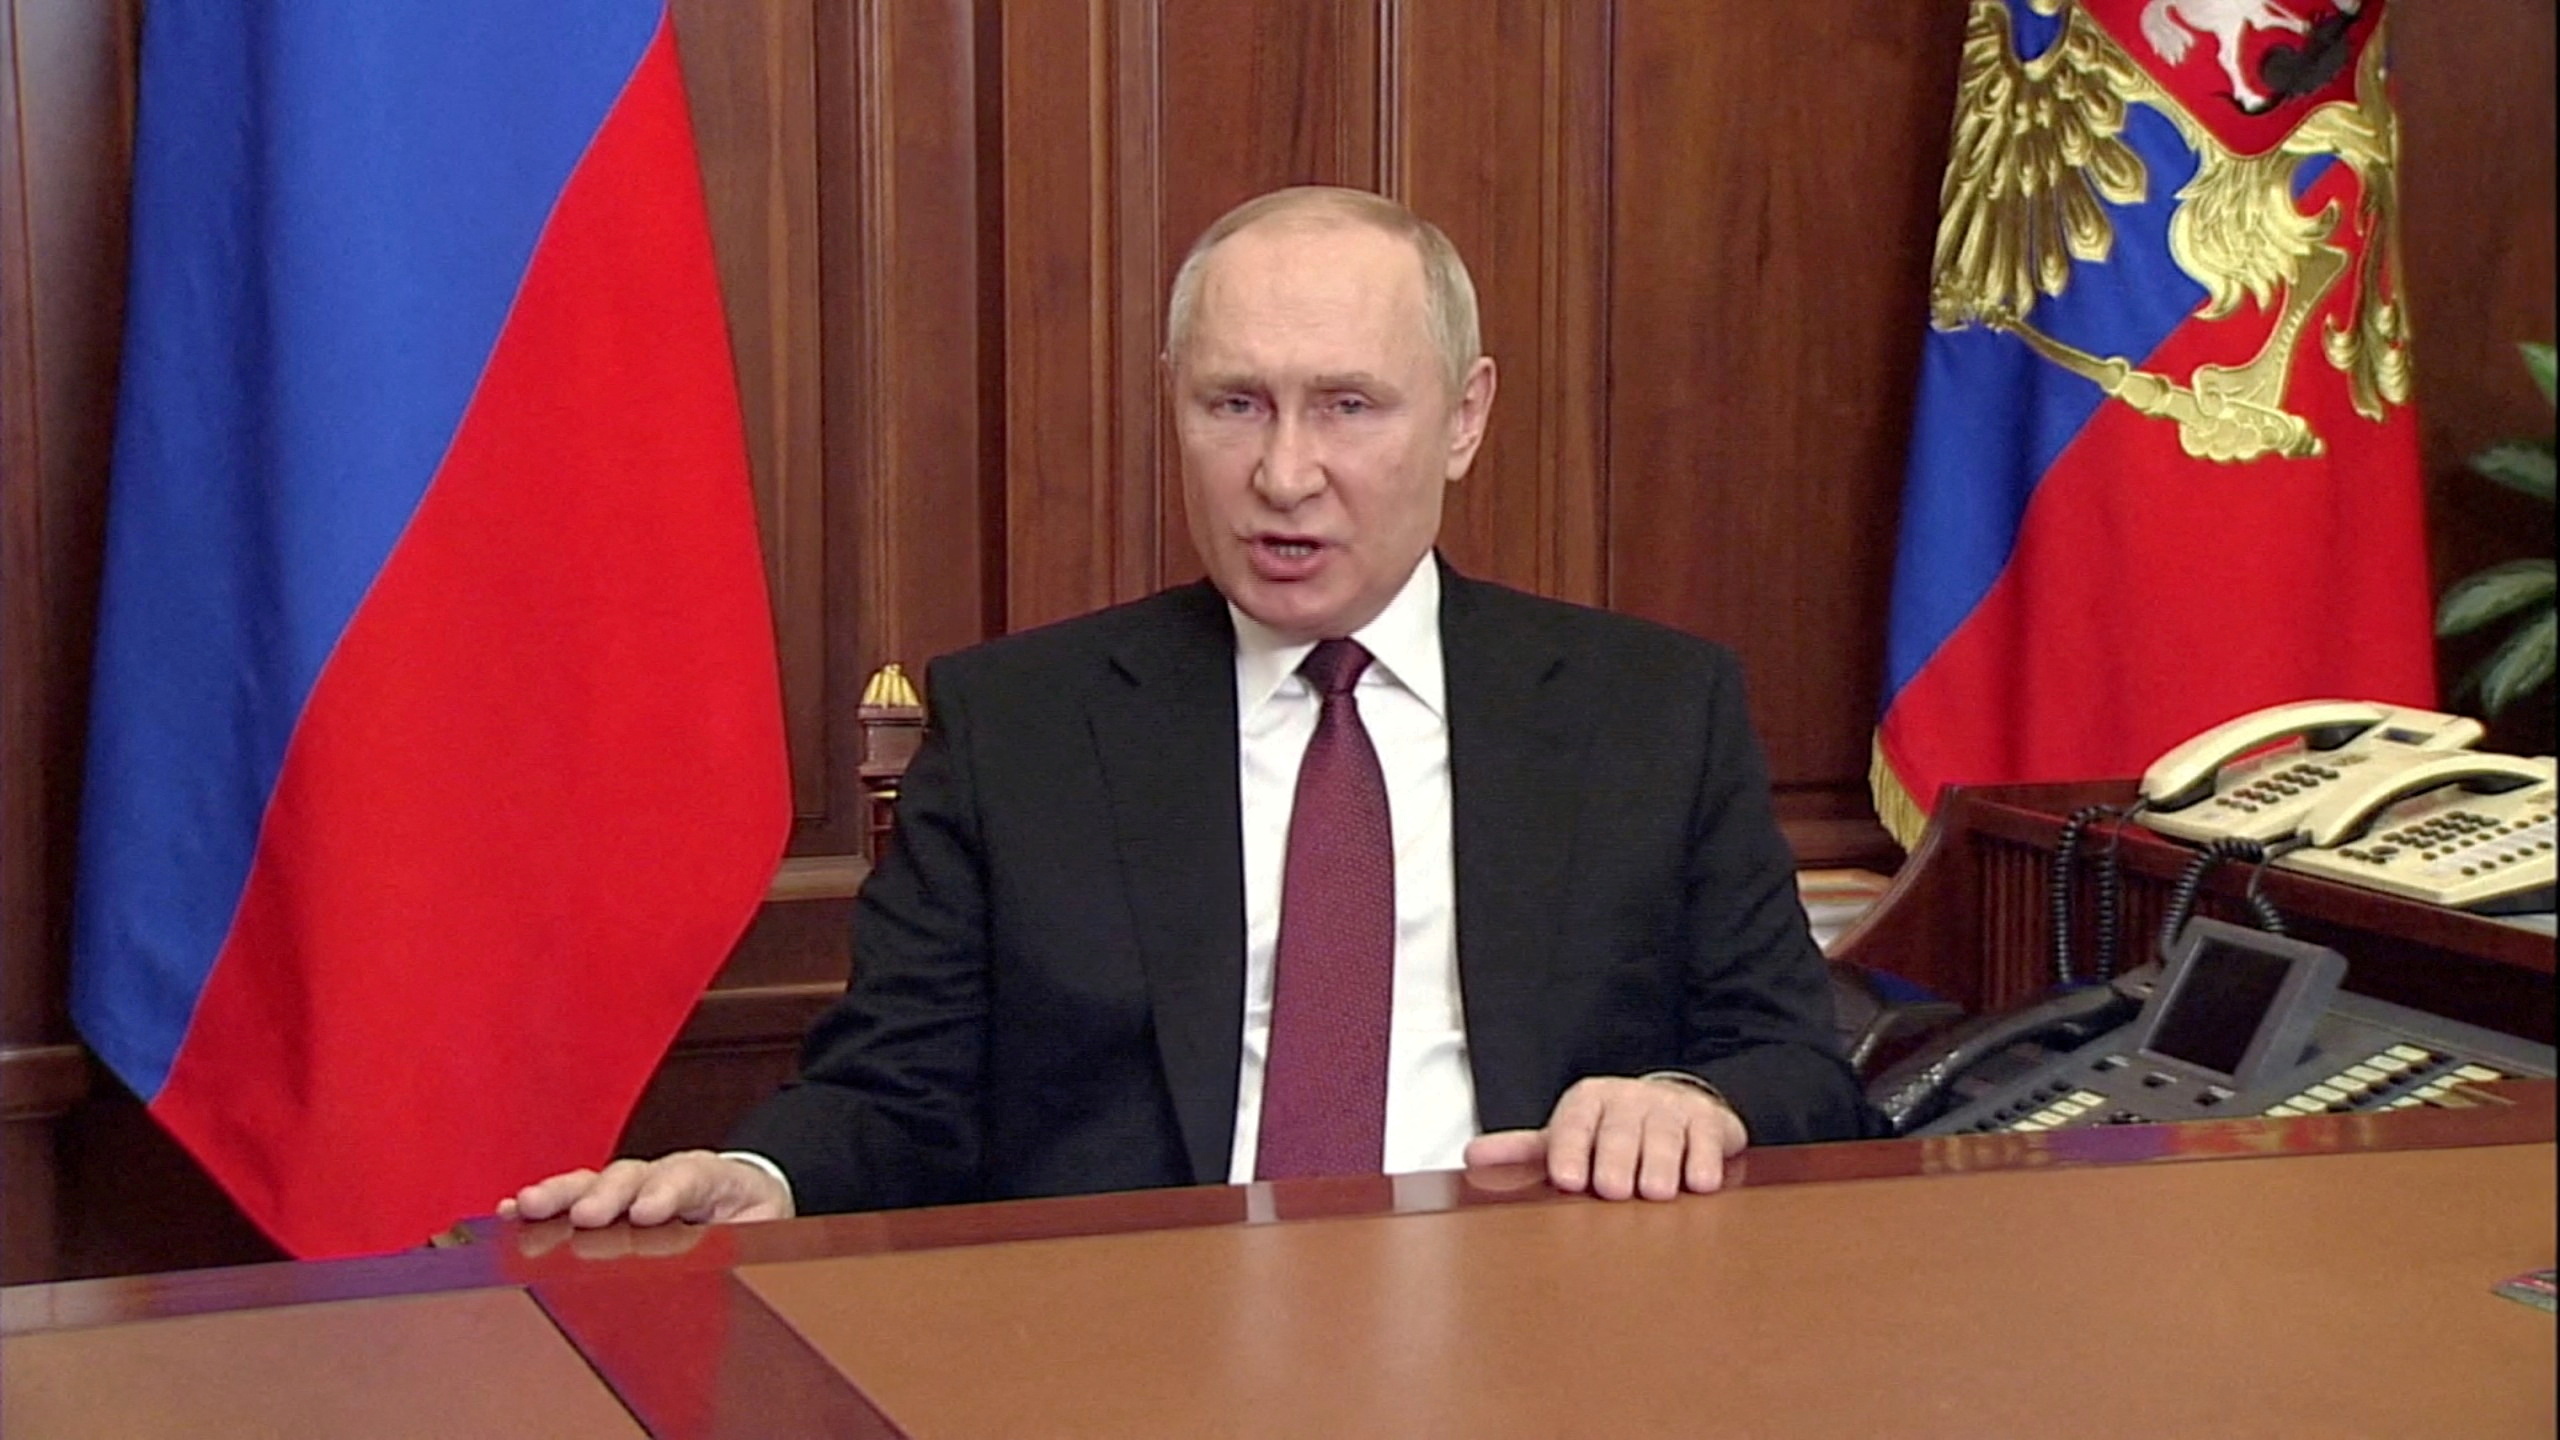 FILE PHOTO: Russian President Vladimir Putin speaks about authorising a special military operation in Ukraine's Donbass region during a special televised address on Russian state TV, in Moscow, Russia, February 24, 2022, in this still image taken from video.  R